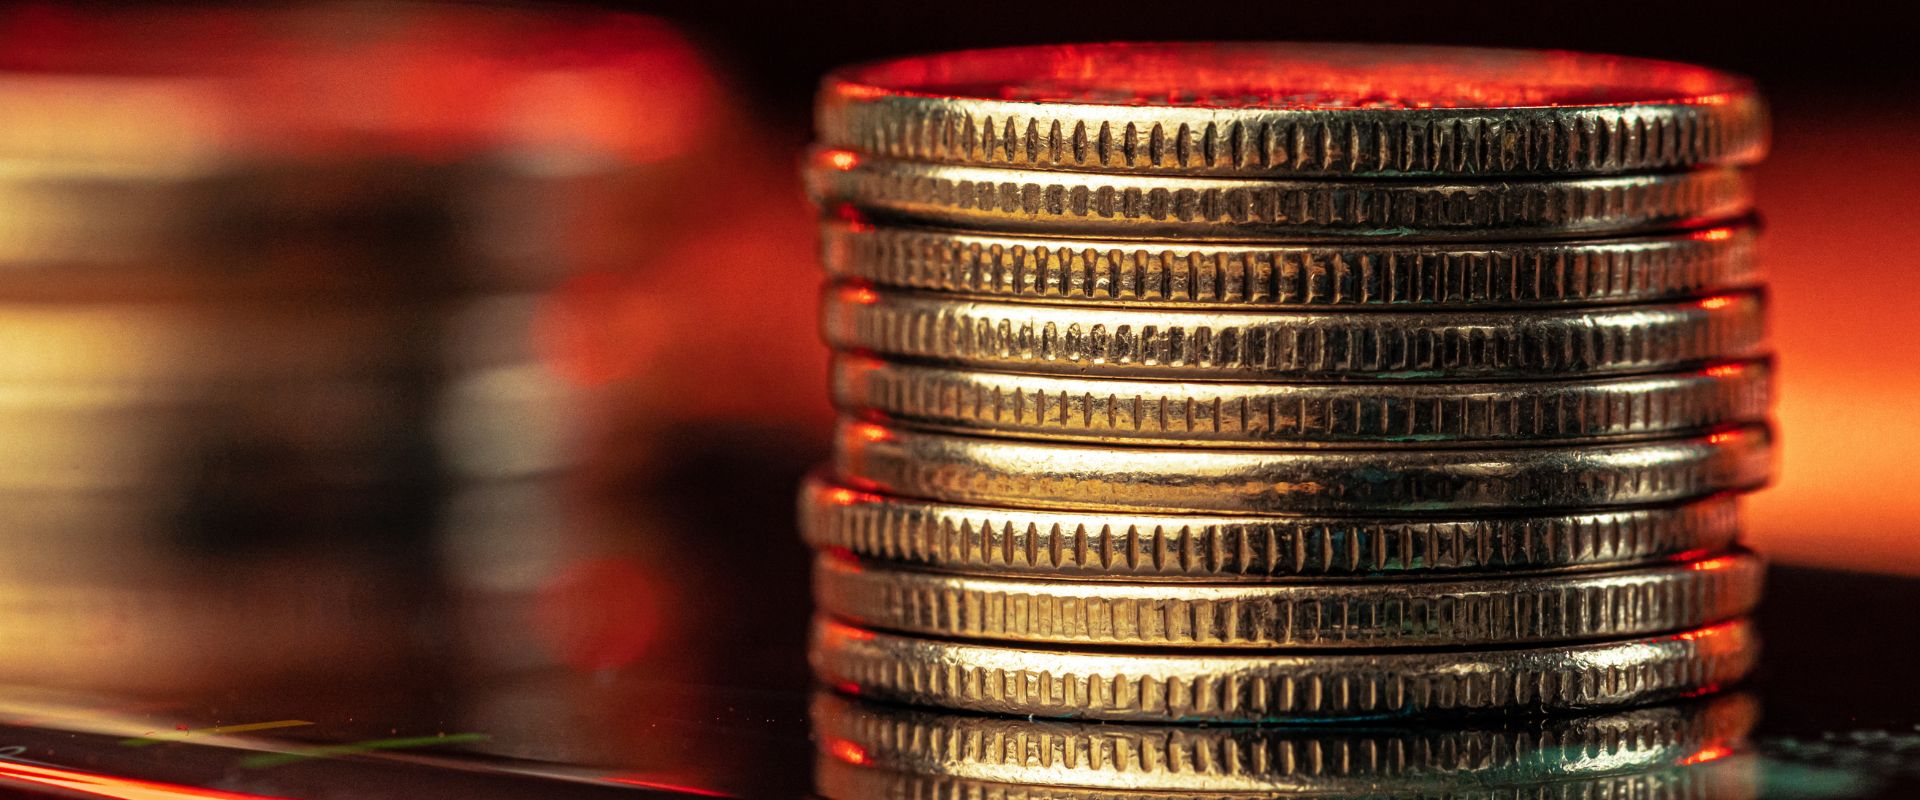 gold coins stack equally in blurred background